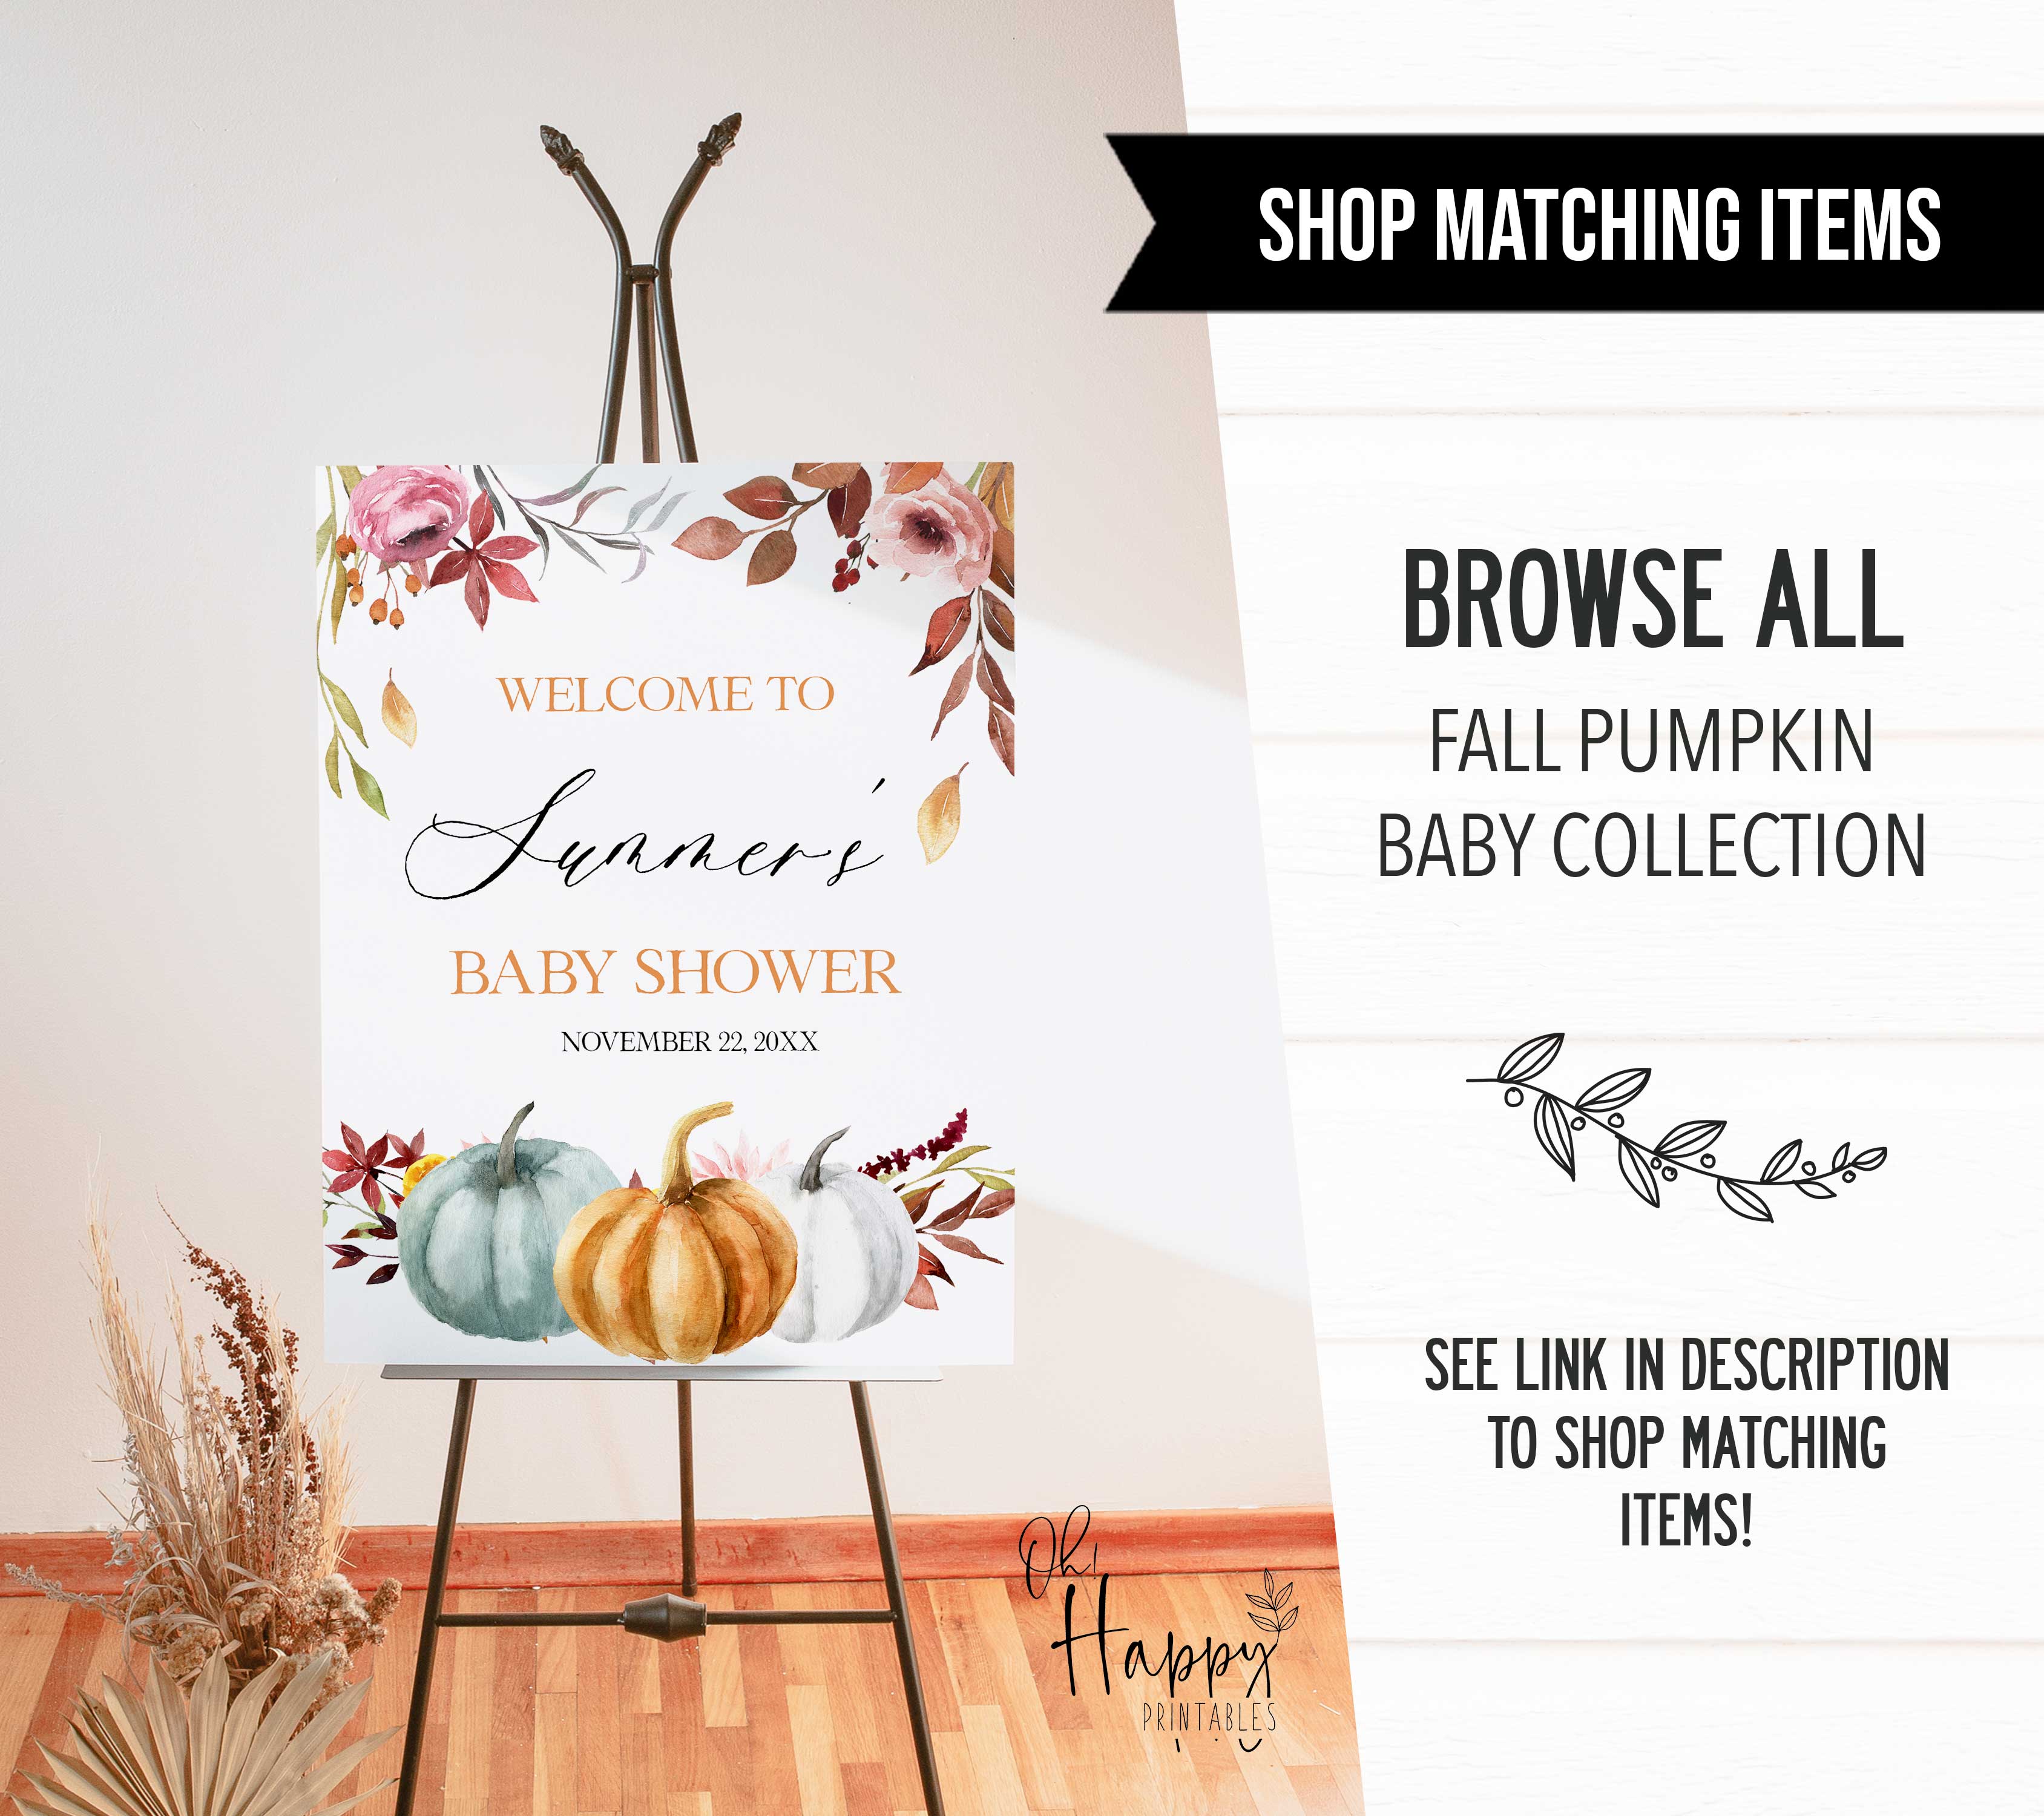 Fully editable and printable baby shower nursery rhyme quiz game with a fall pumpkin design. Perfect for a Fall Pumpkin baby shower themed party